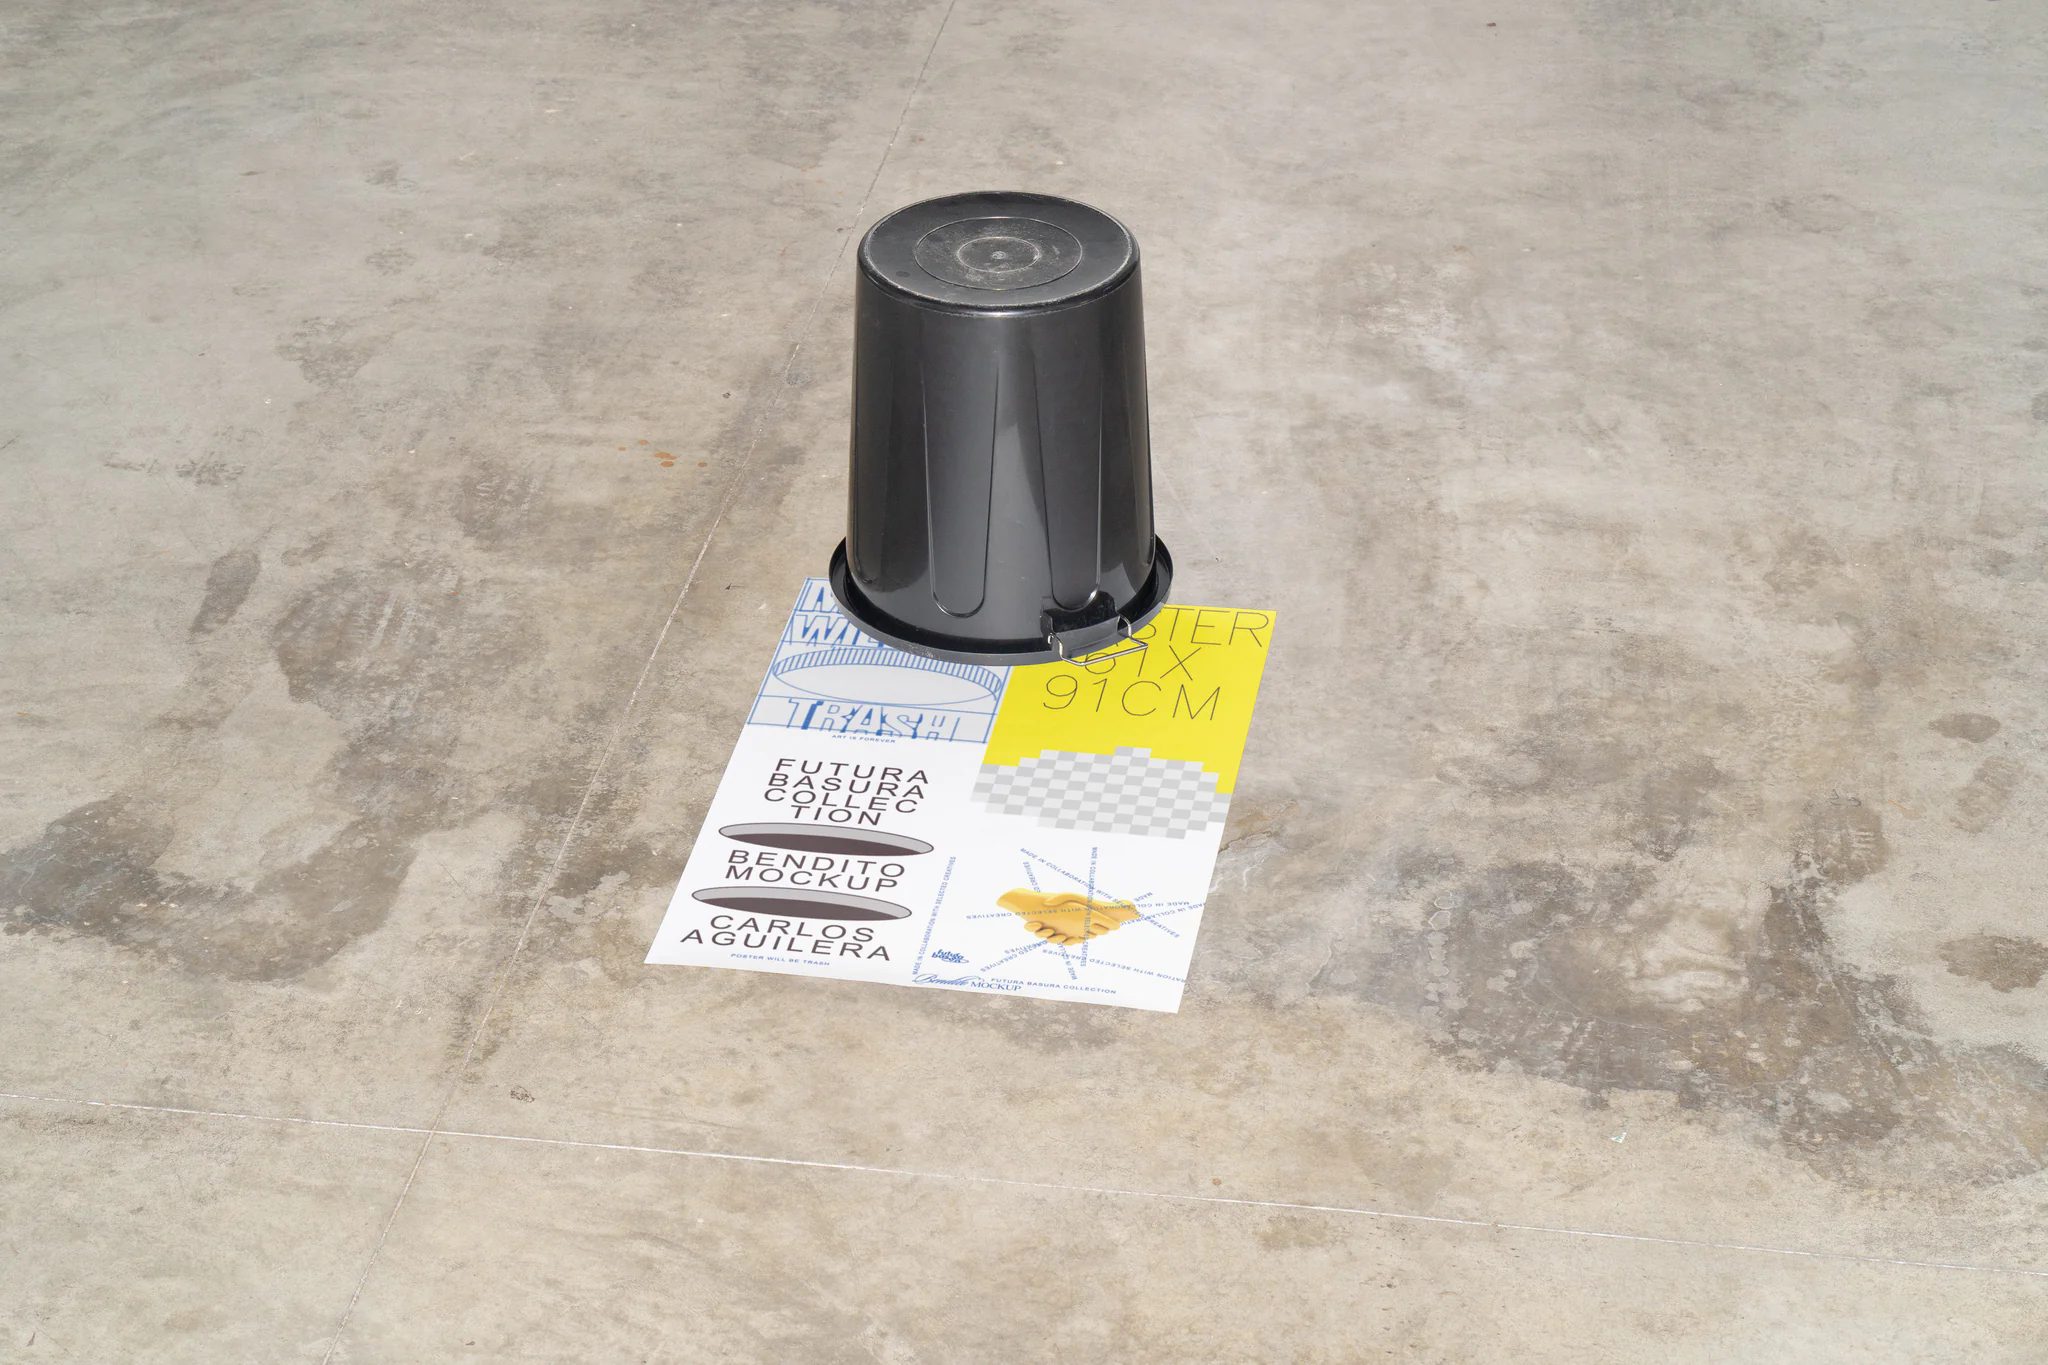 Poster mockup placed in the floor with a black plastic bin on top.